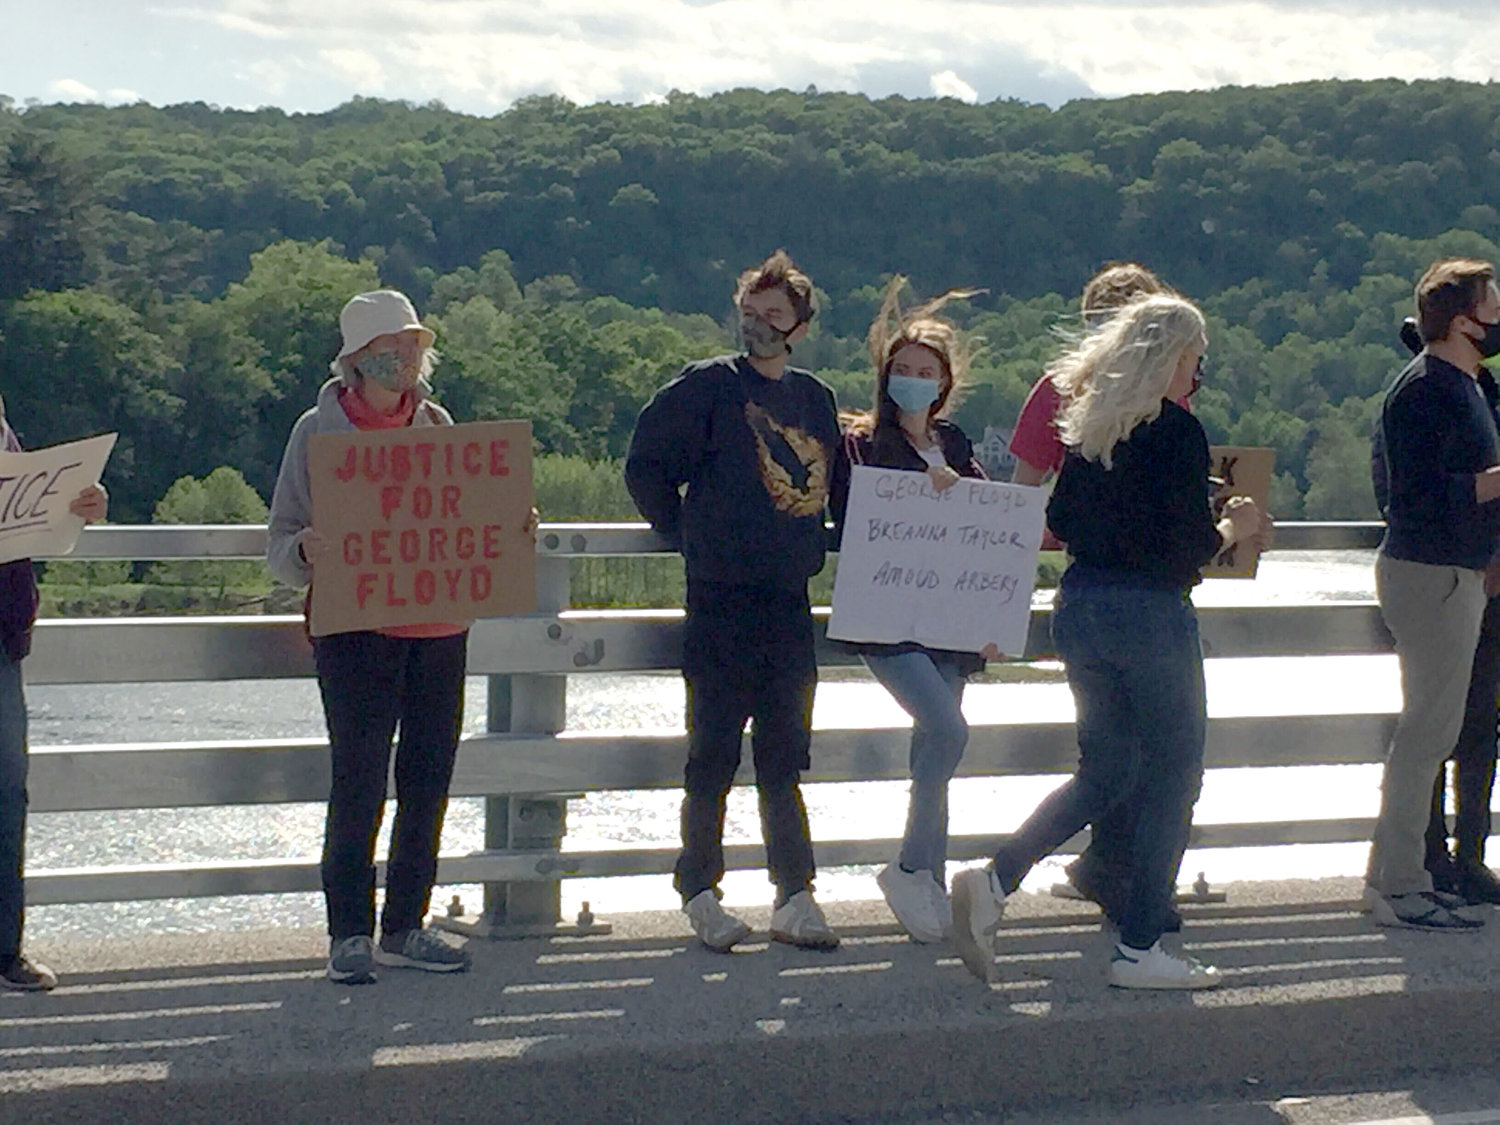 Over 50 people gathered on the Narrowsburg bridge at 5 pm to demonstrate concern and solidarity for people of color who experience oppression in their daily lives.